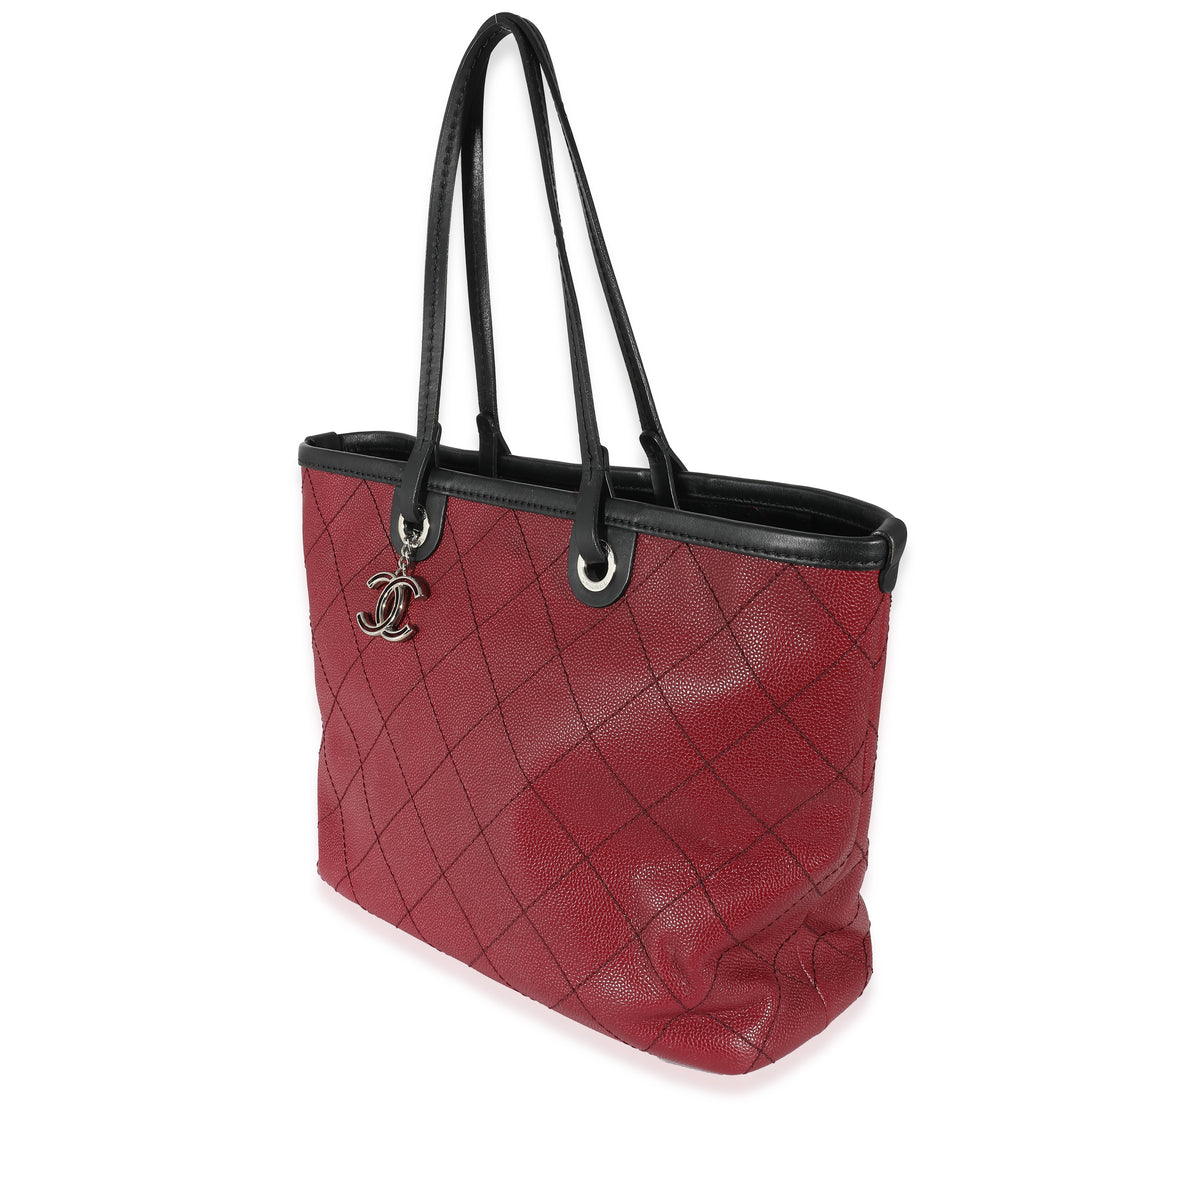 Burgundy Quilted Caviar Fever Tote